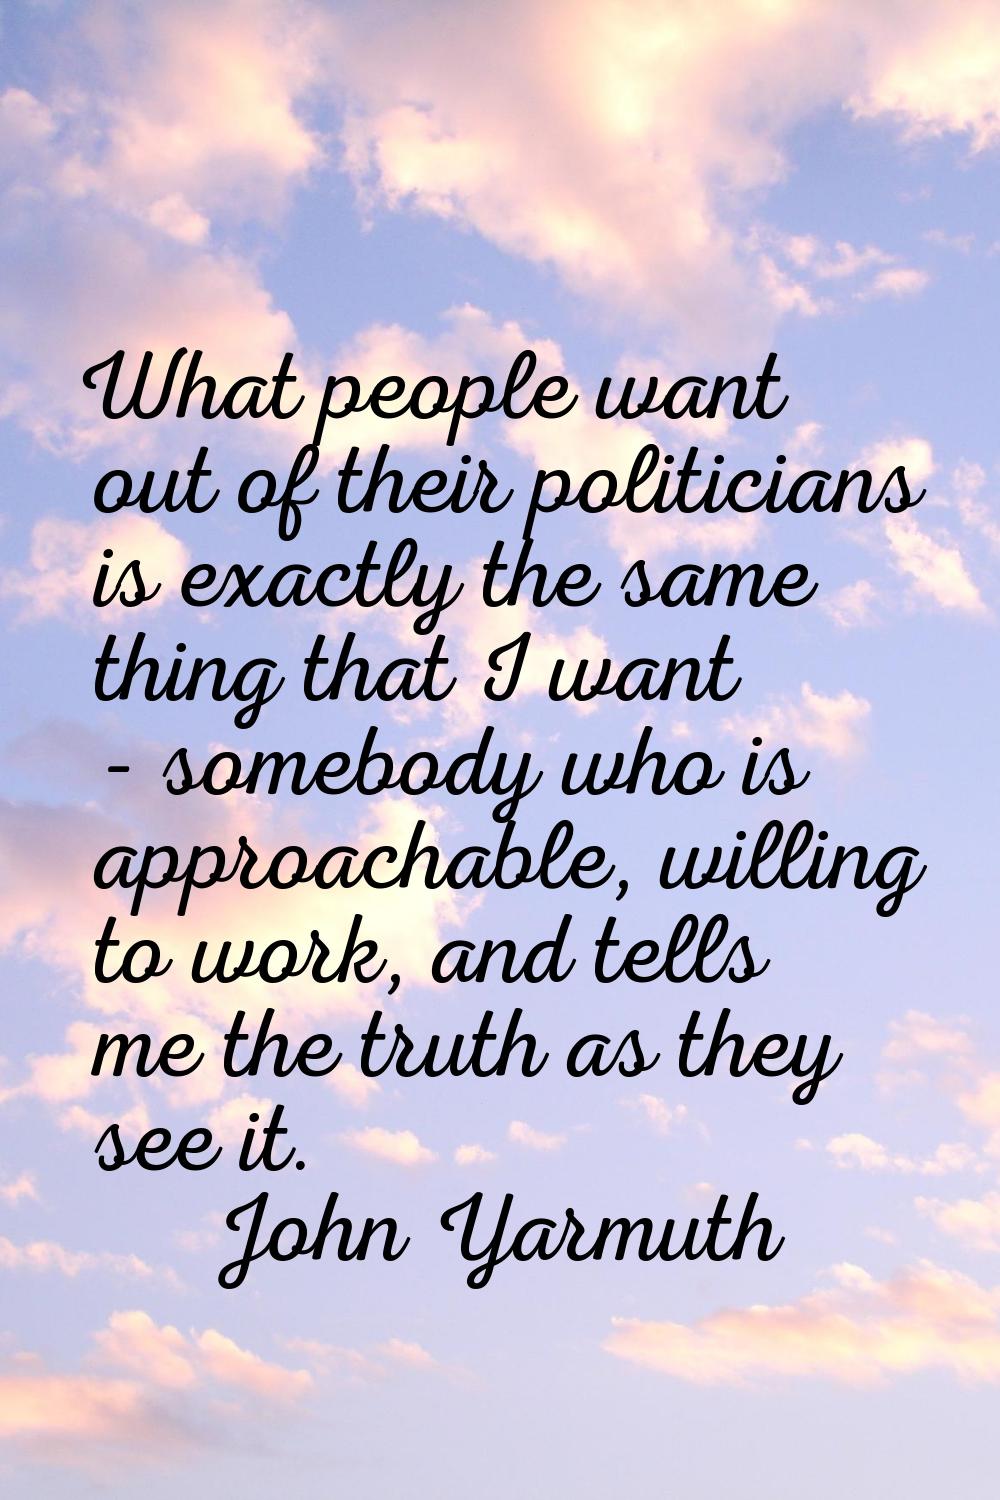 What people want out of their politicians is exactly the same thing that I want - somebody who is a